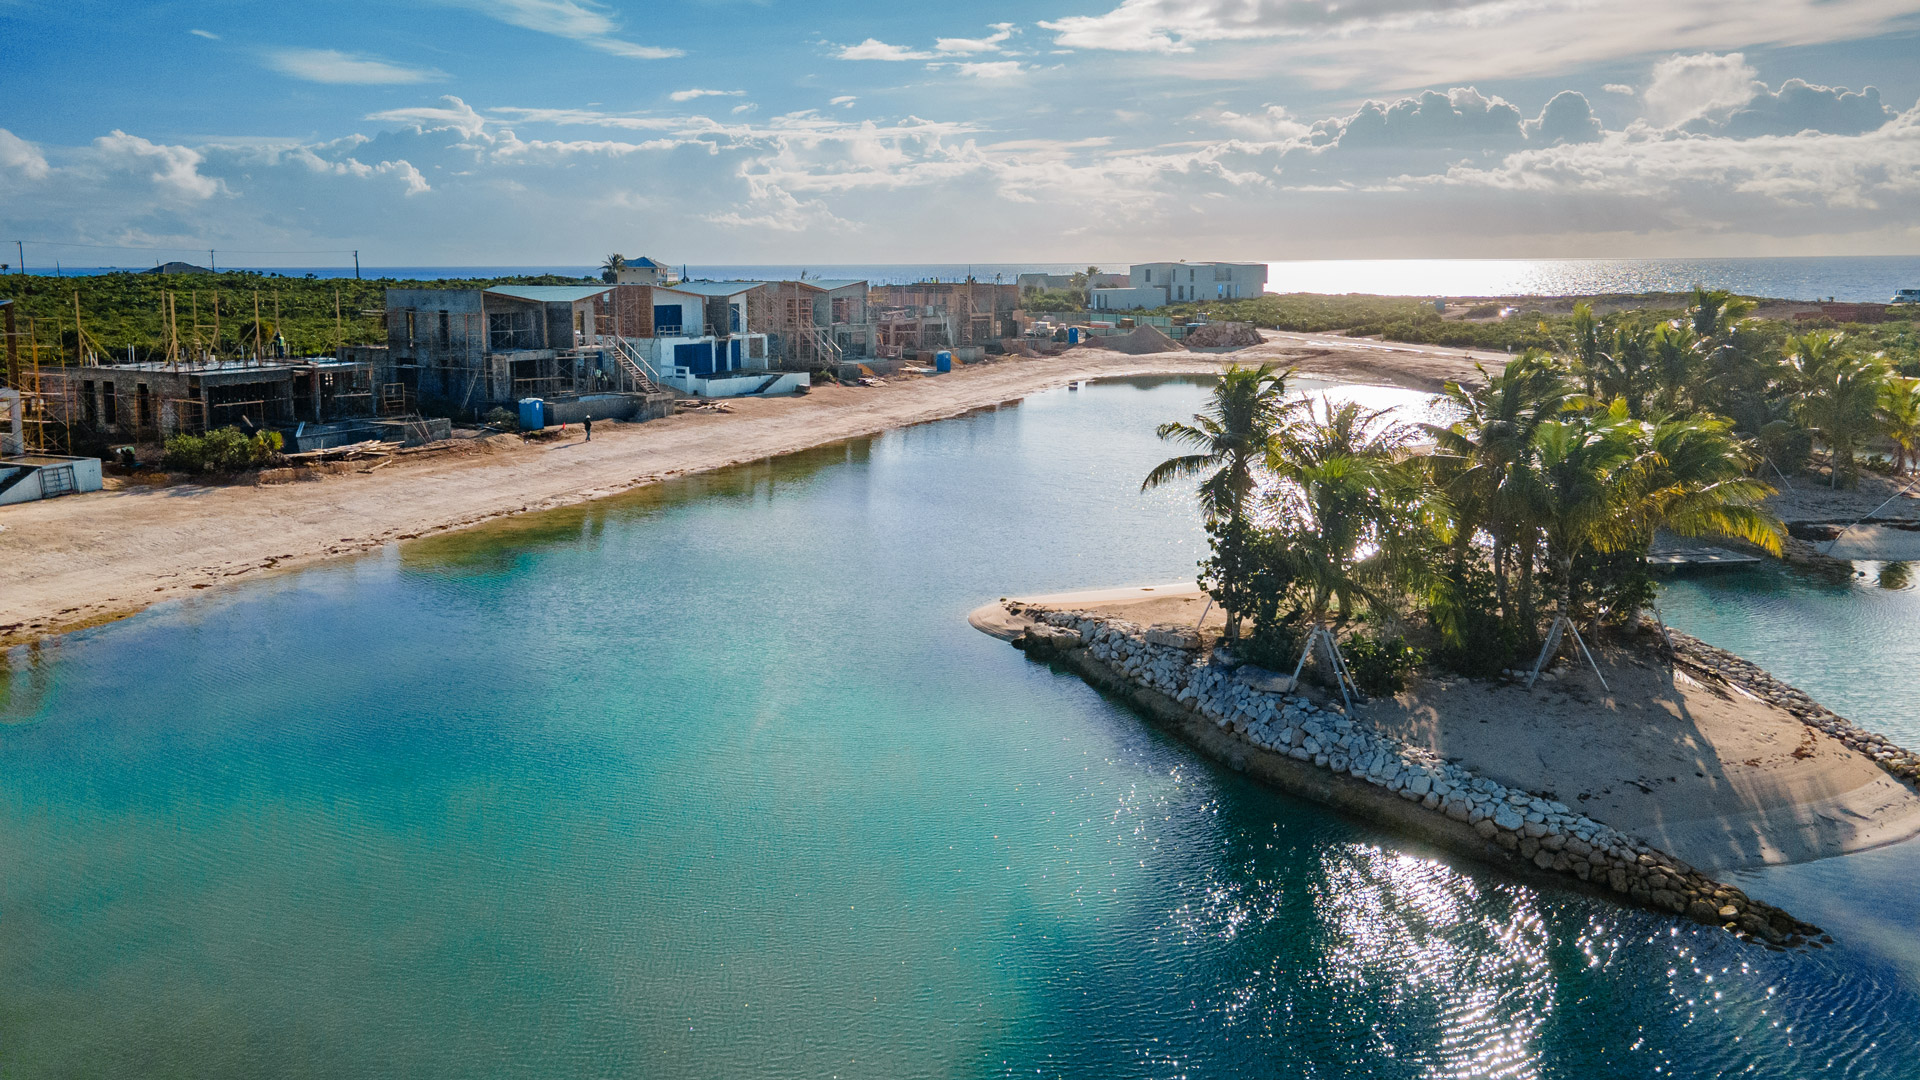 ©South Bank | Construction | Aerial View of The Lagoon